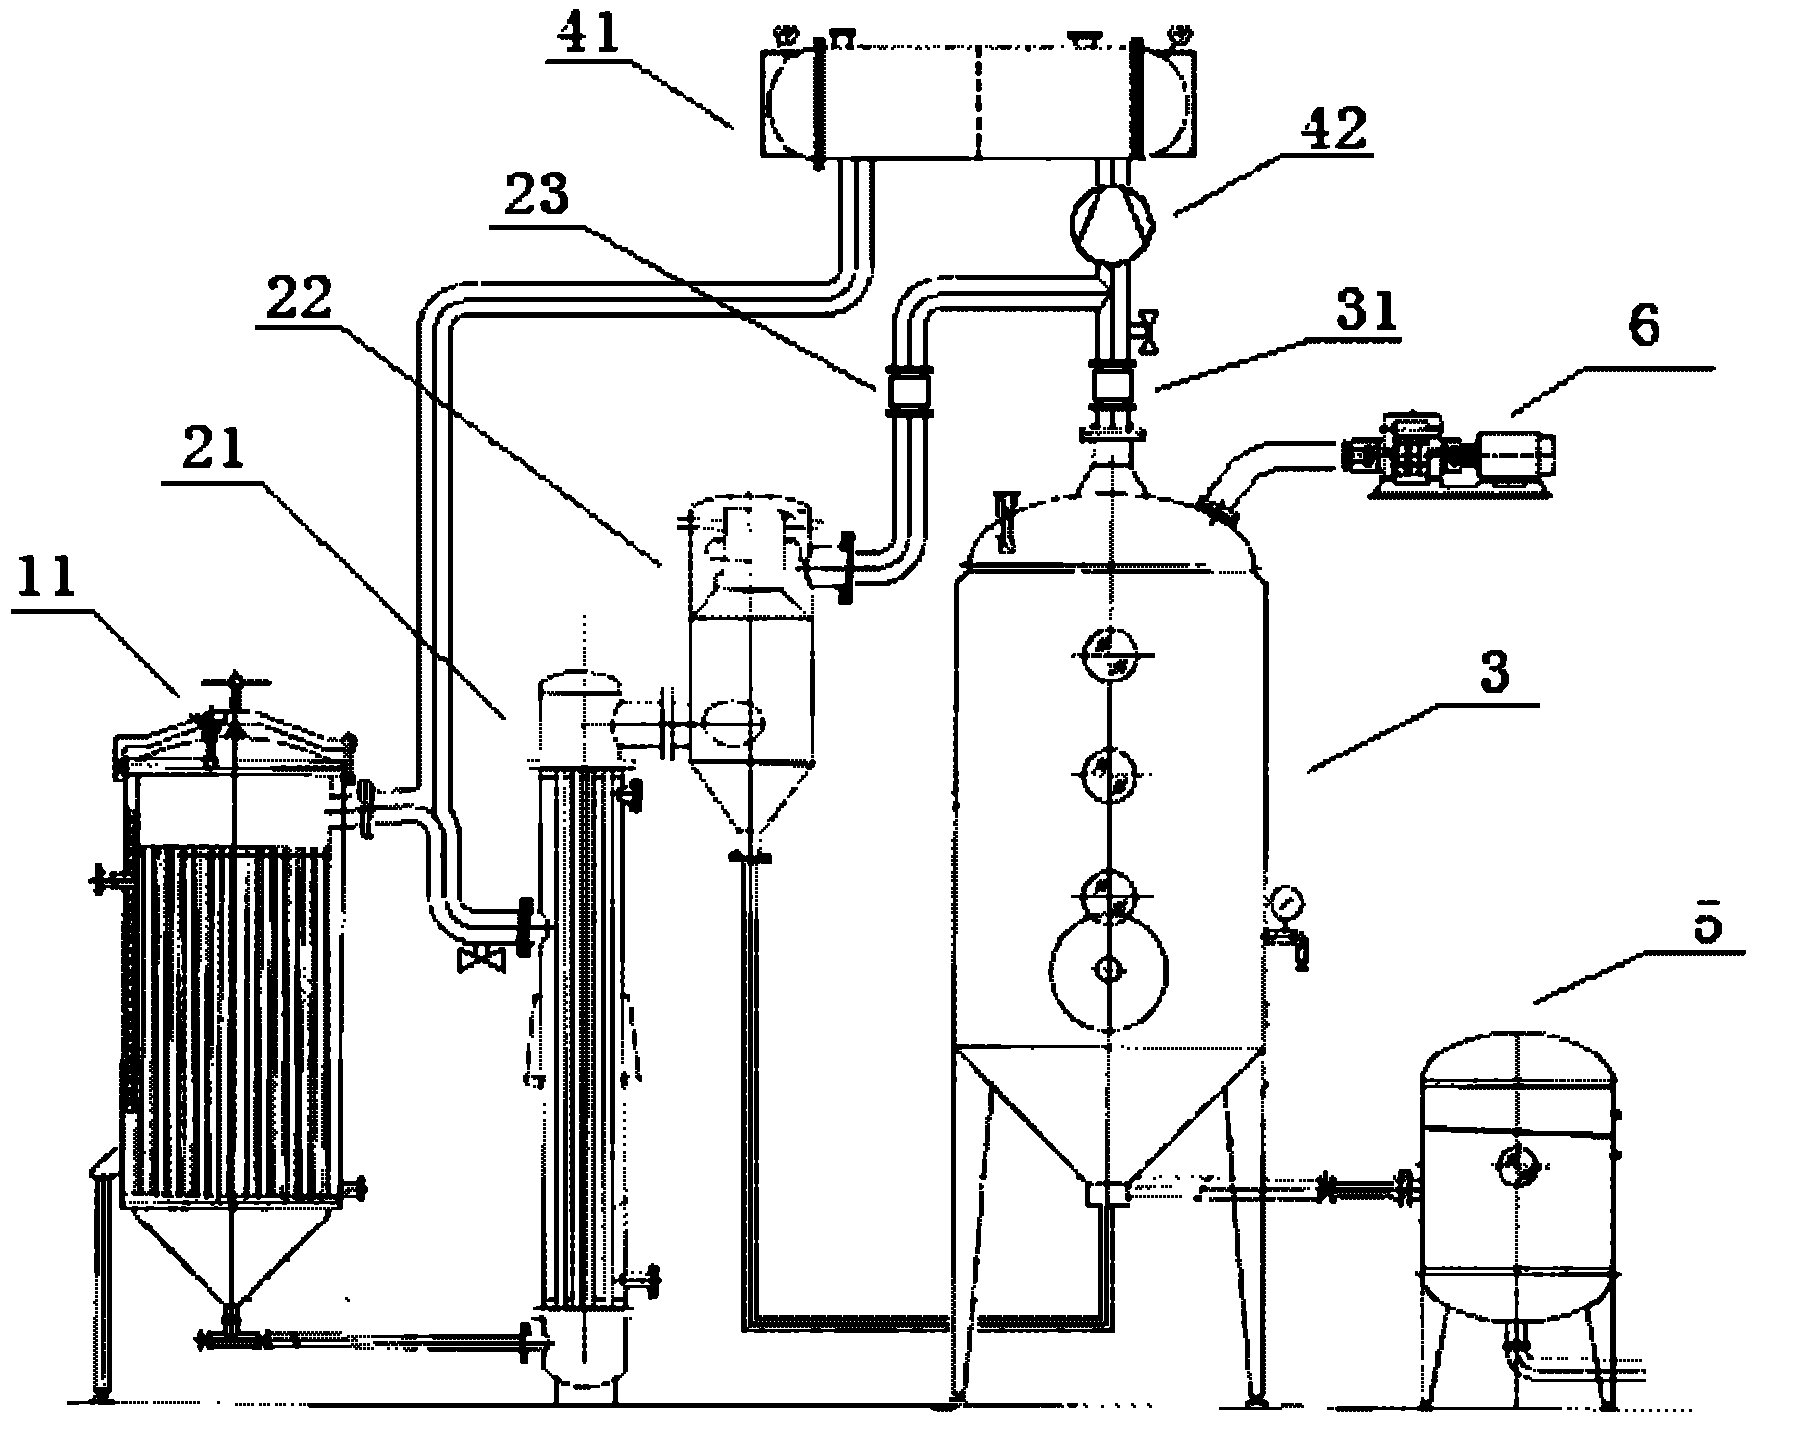 Microwave evaporation and concentration system